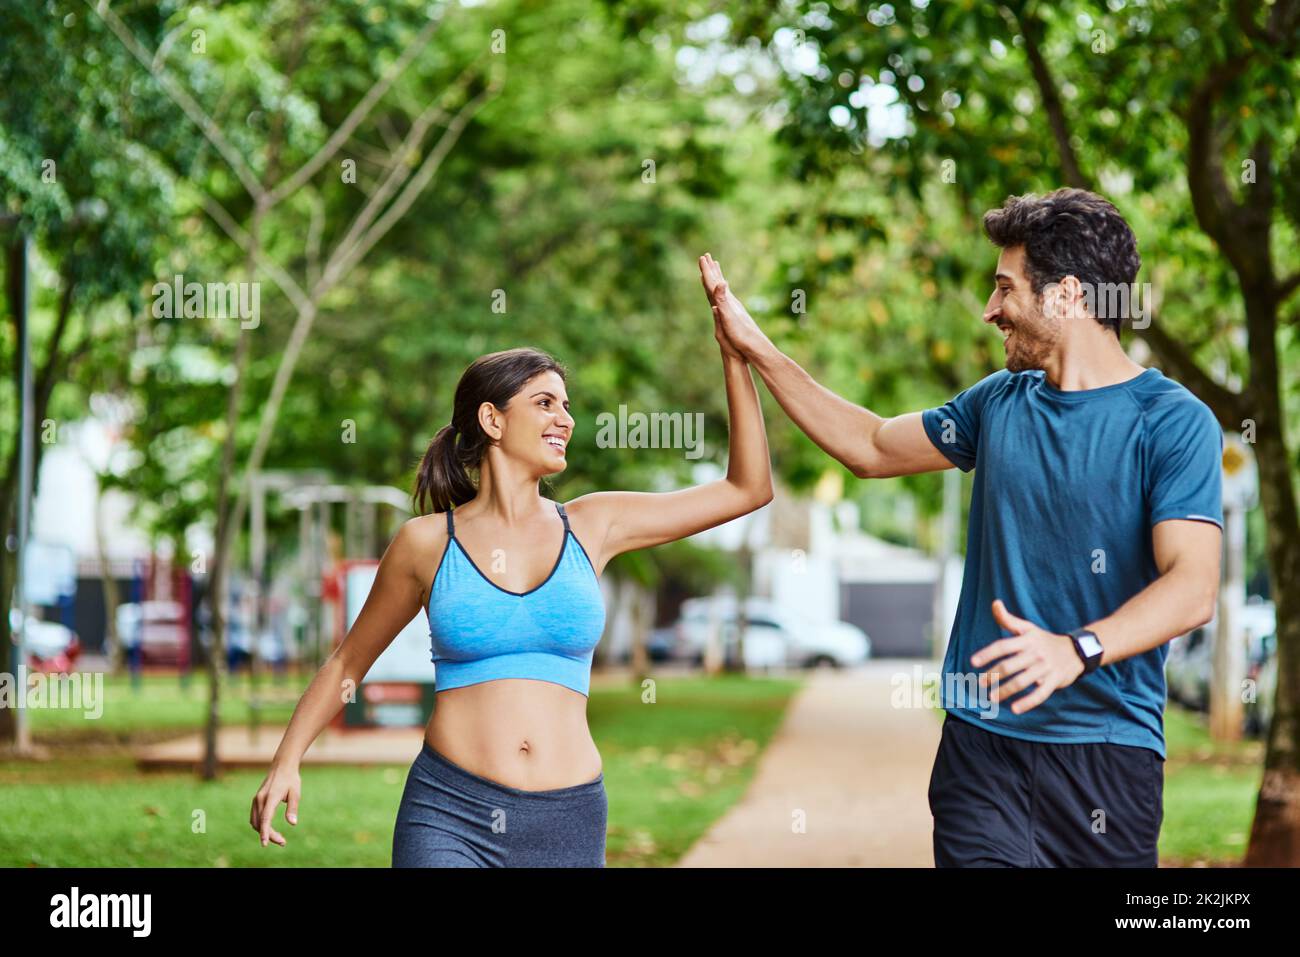 Thats just what we needed to get our hearts racing. Shot of a sporty young couple high fiving while exercising outdoors. Stock Photo